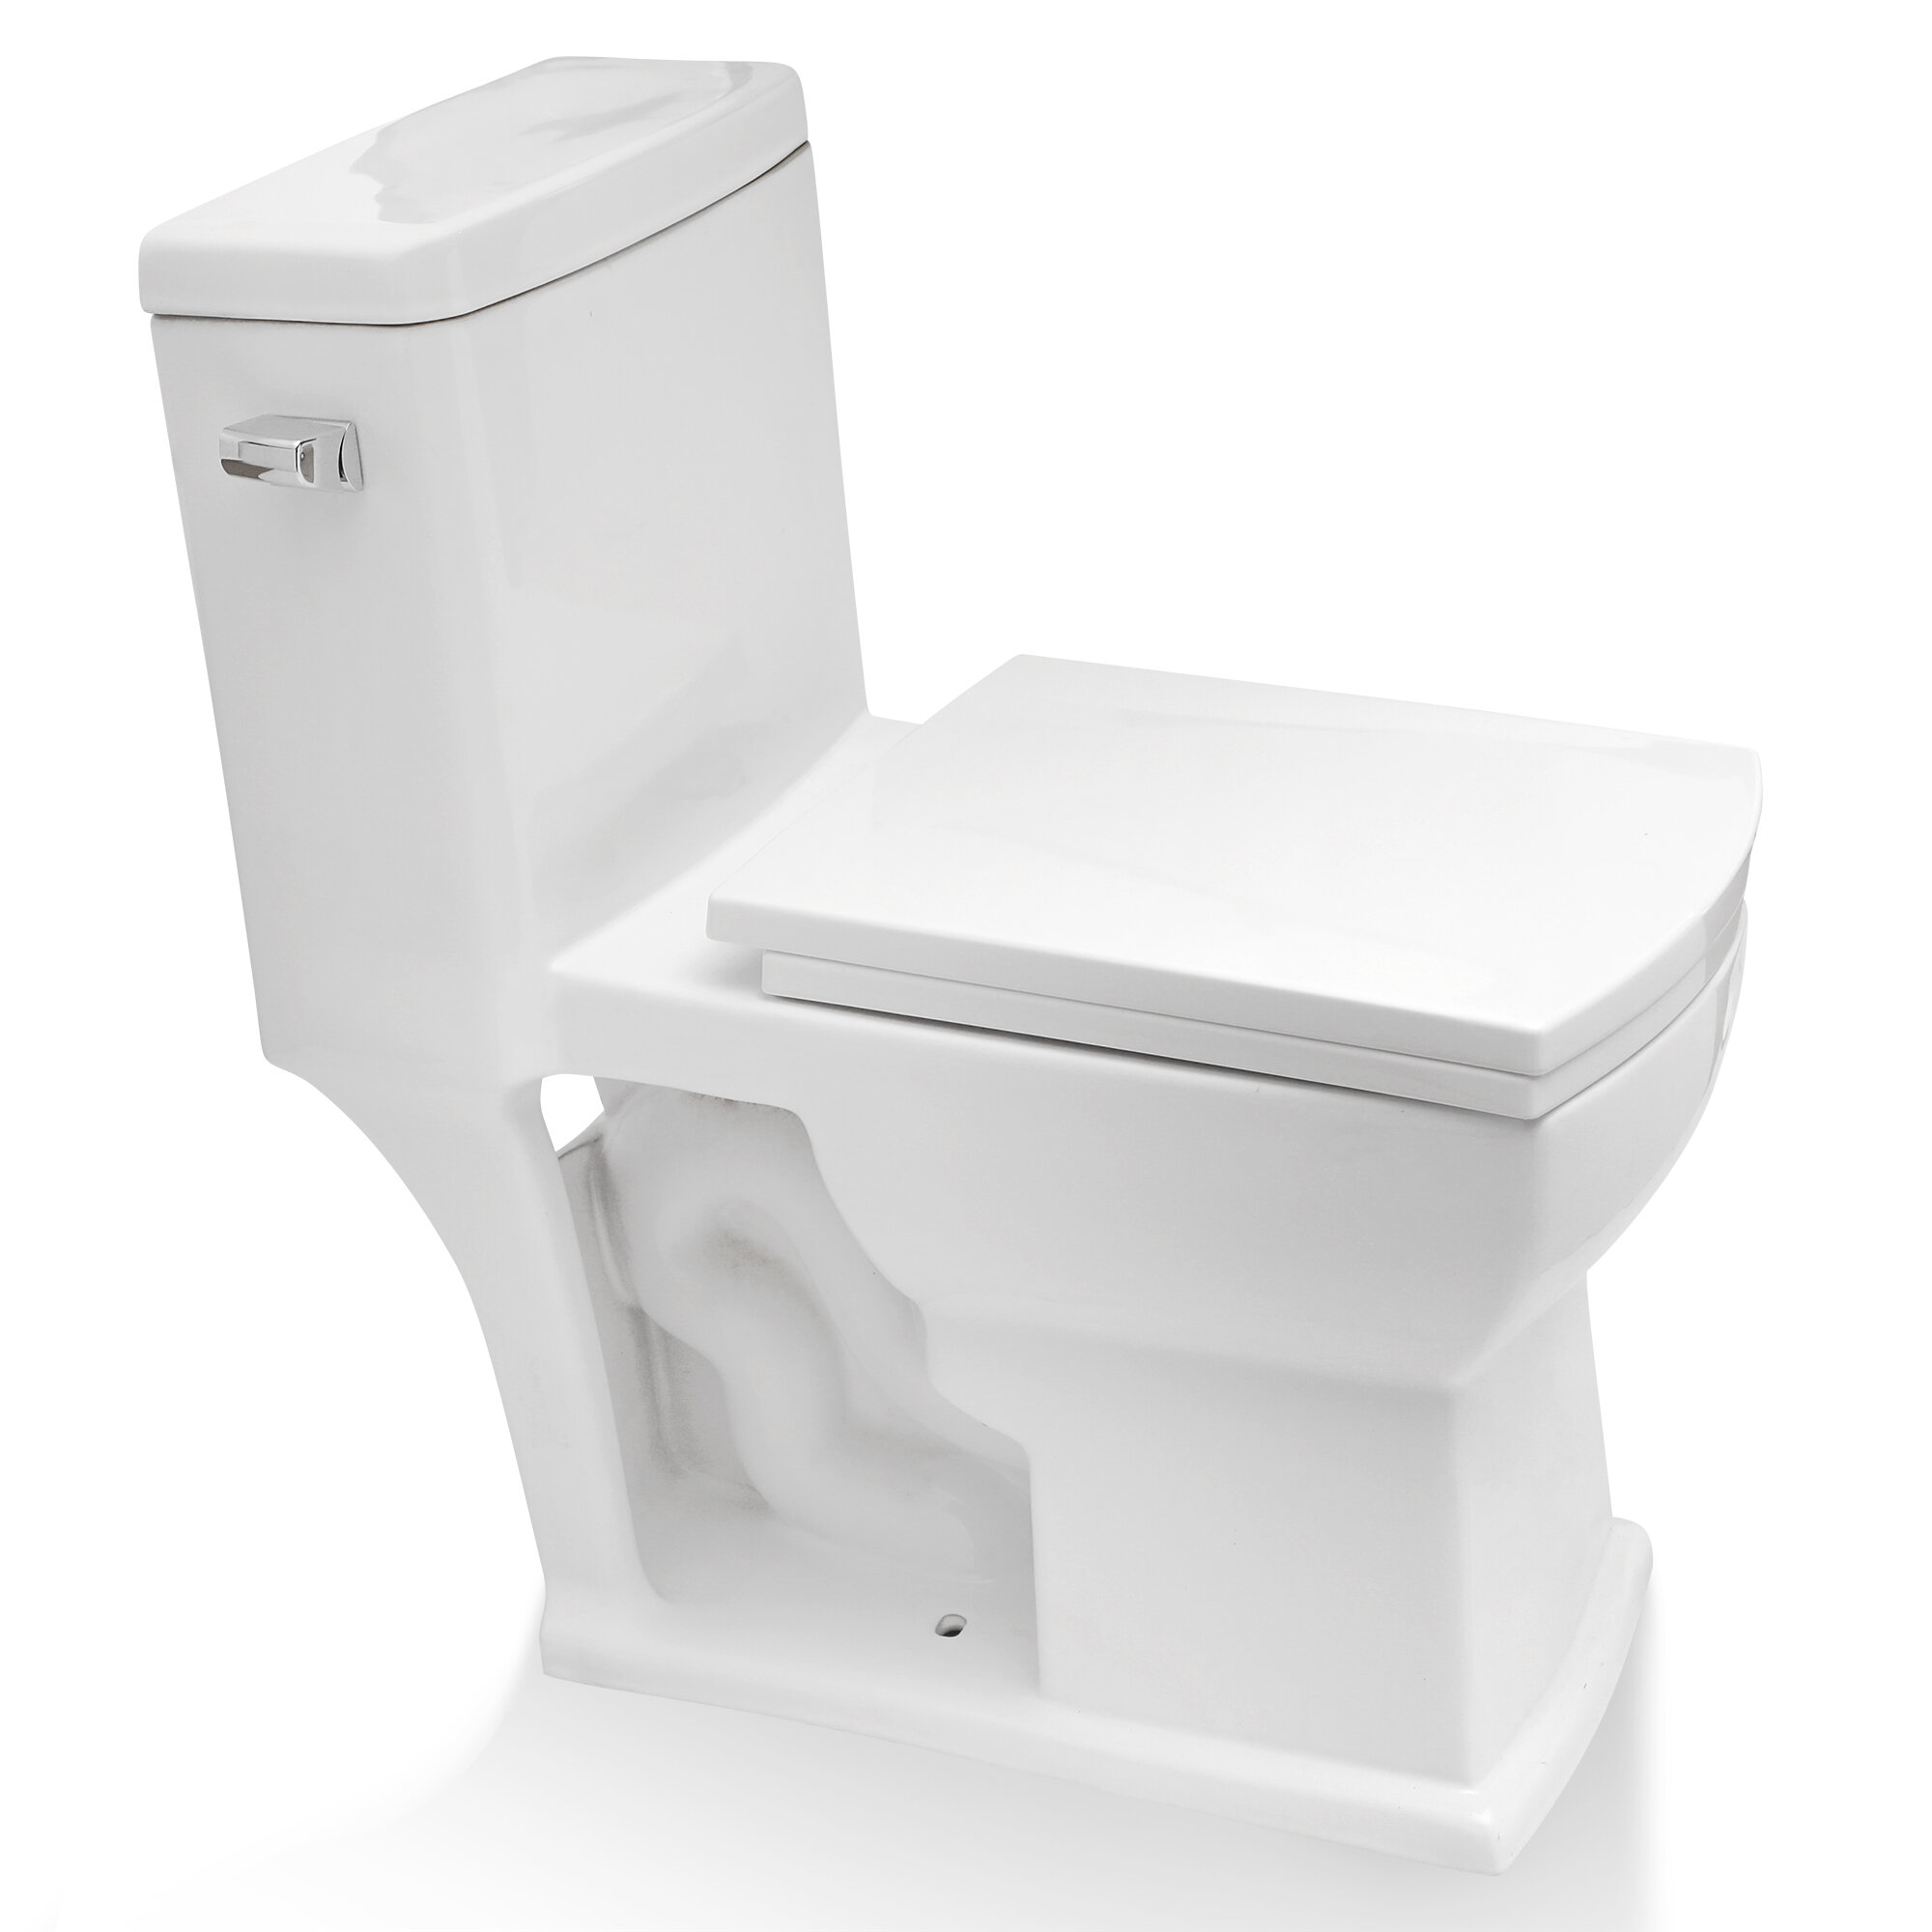 Kichae Sarlai 1 28 Gpf Water Efficient Square One Piece Toilet Seat Included Wayfair